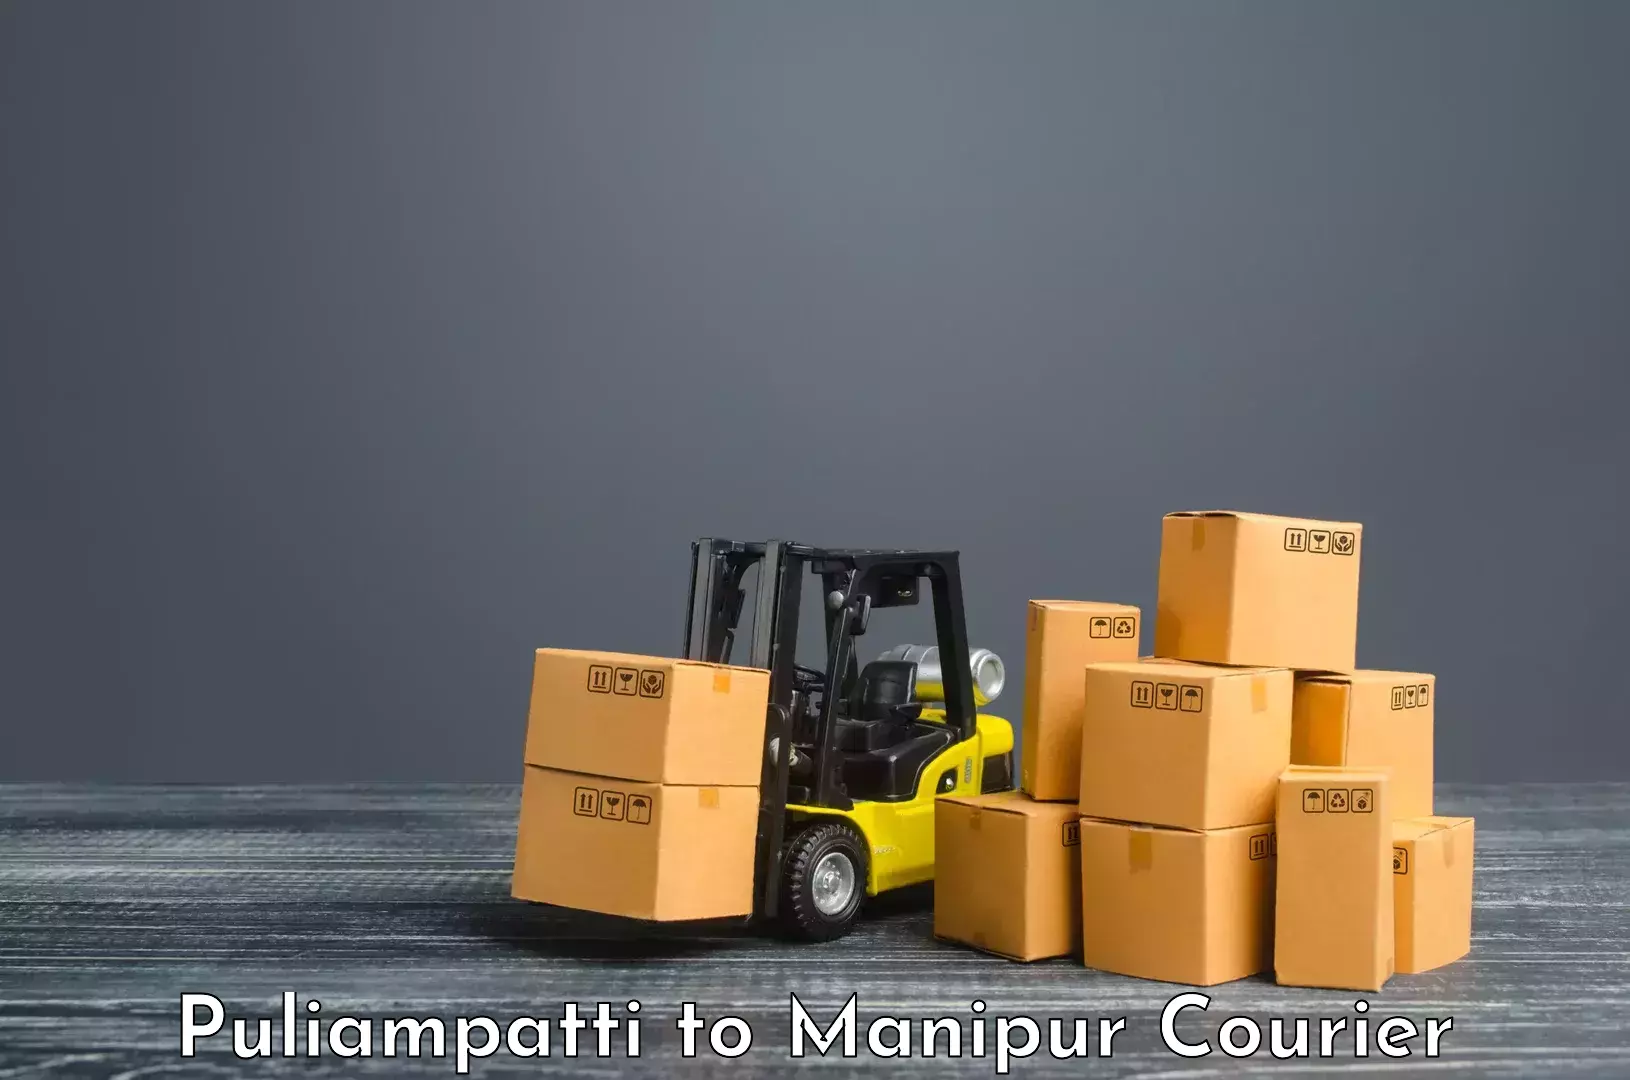 Global shipping networks Puliampatti to Manipur